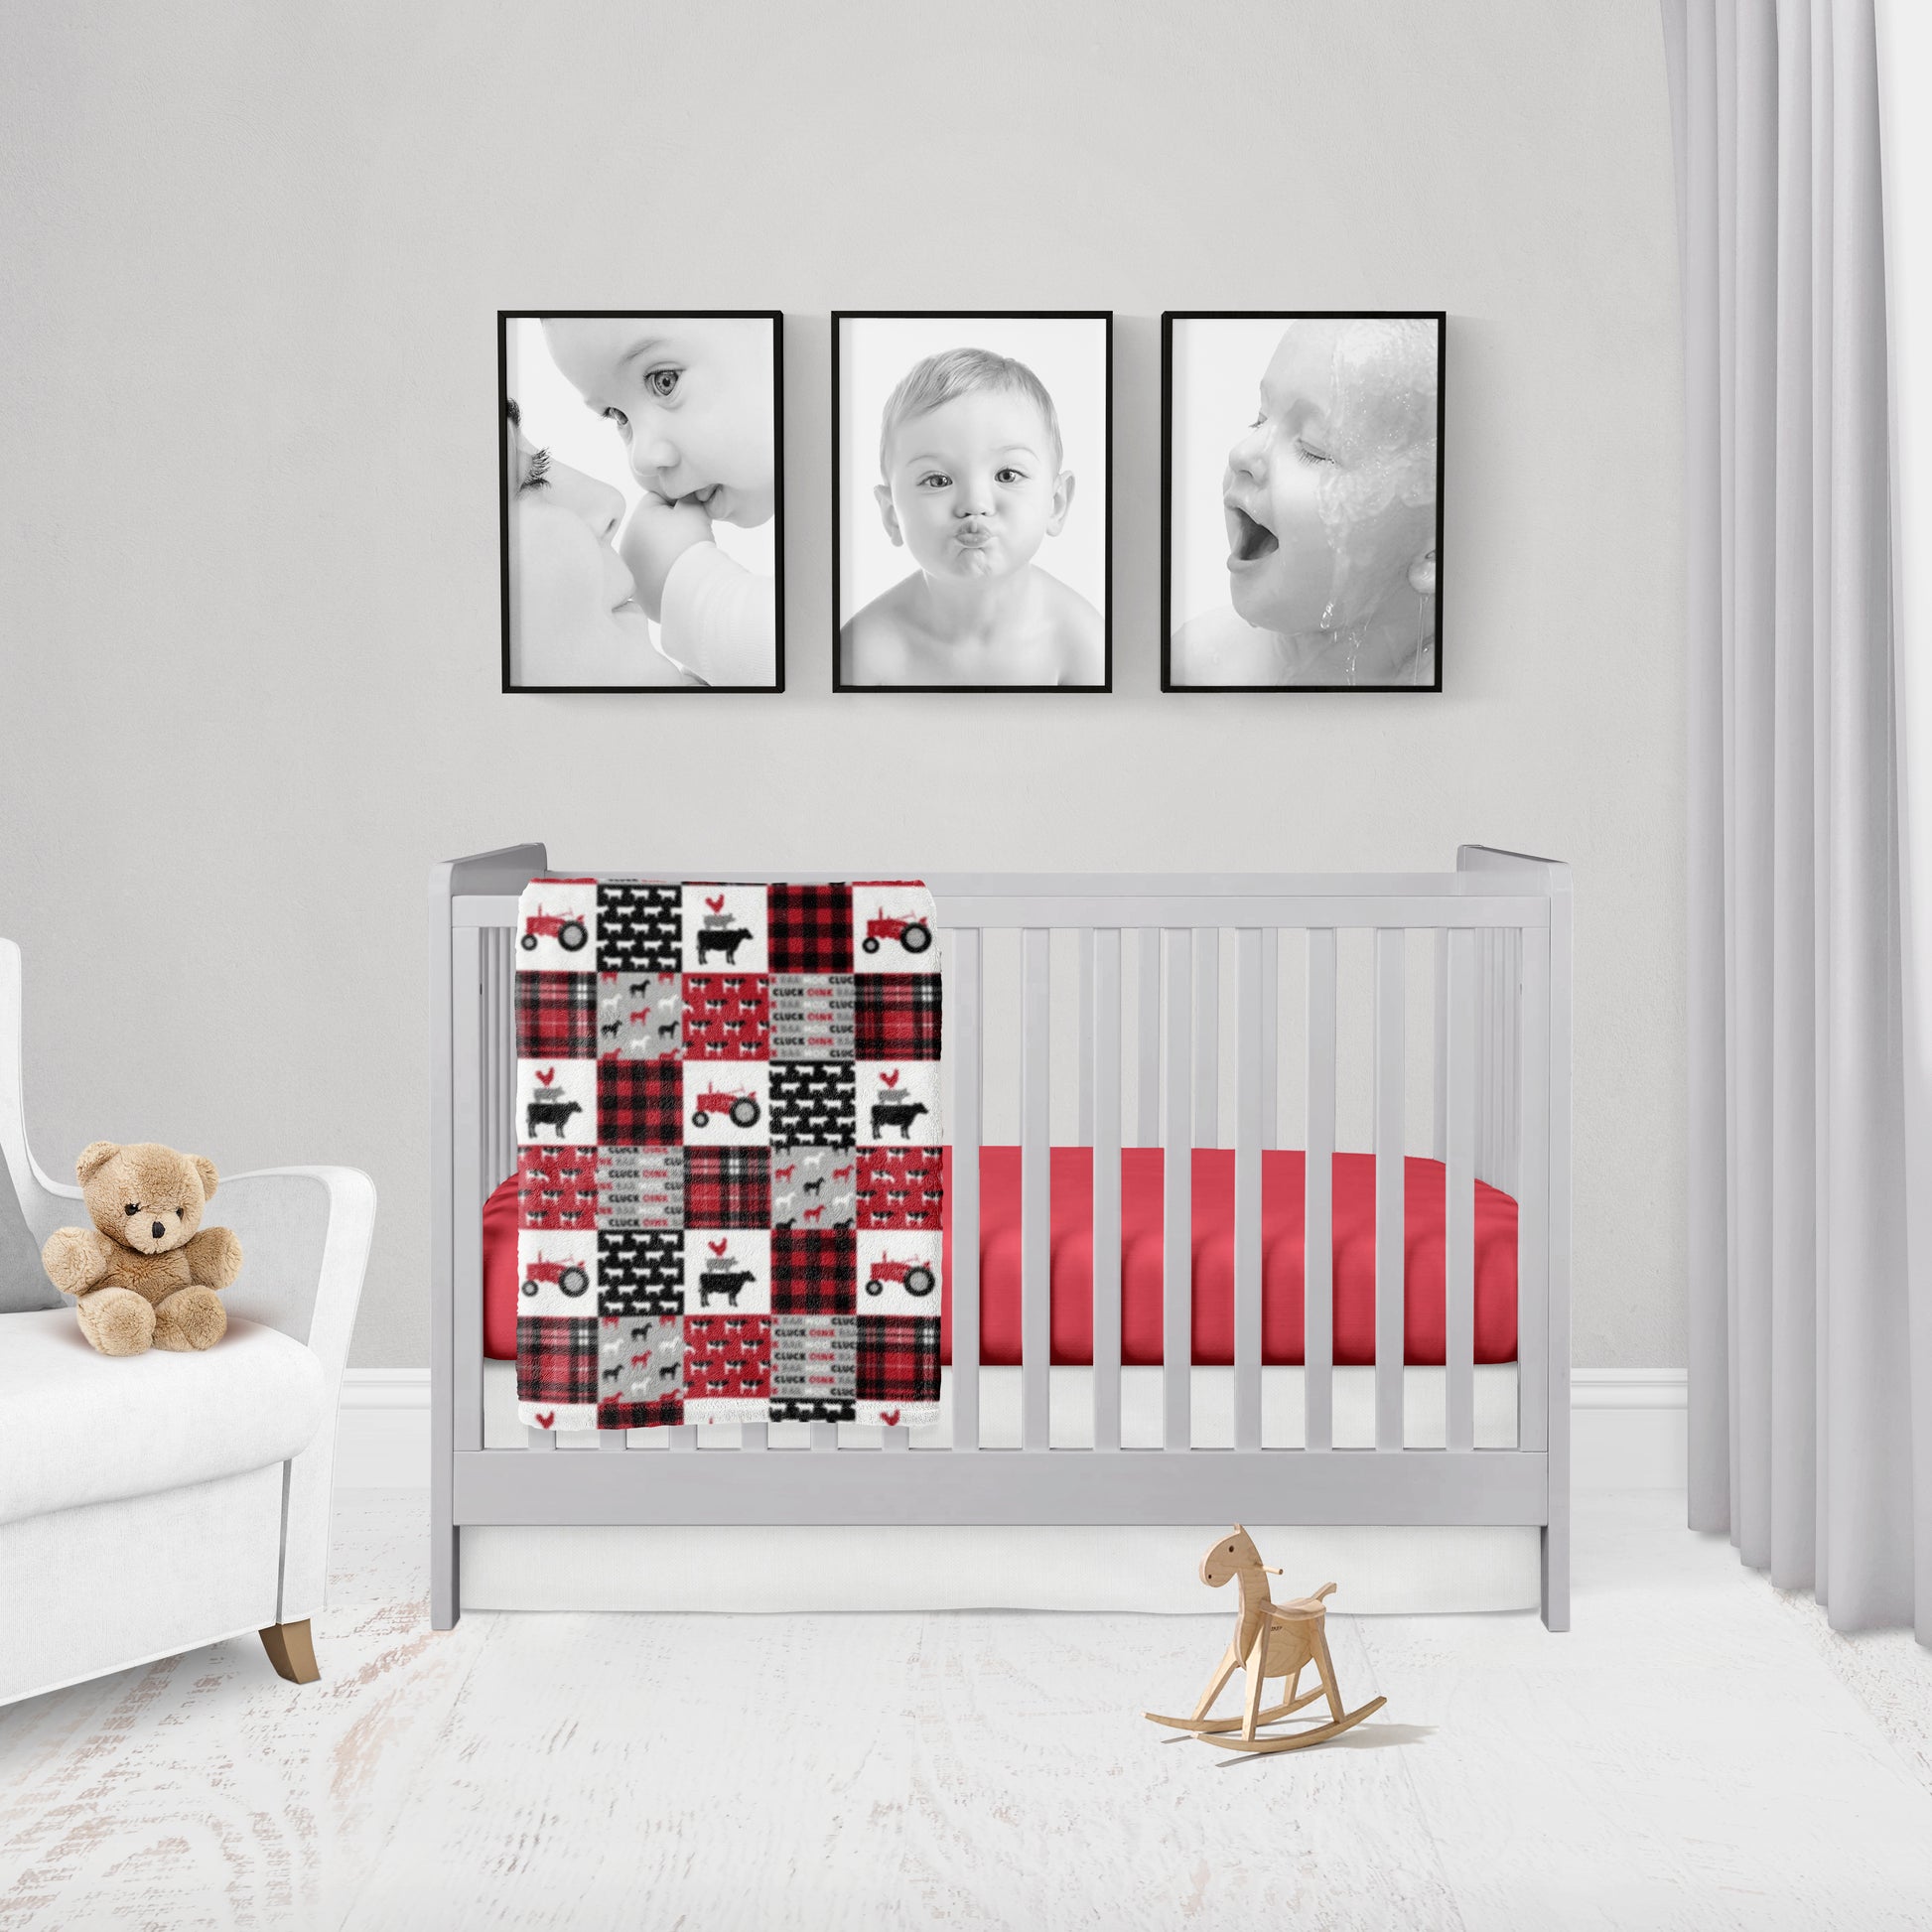 red tractor bedding, red sheet, a red tractor/farm faux minky quilt